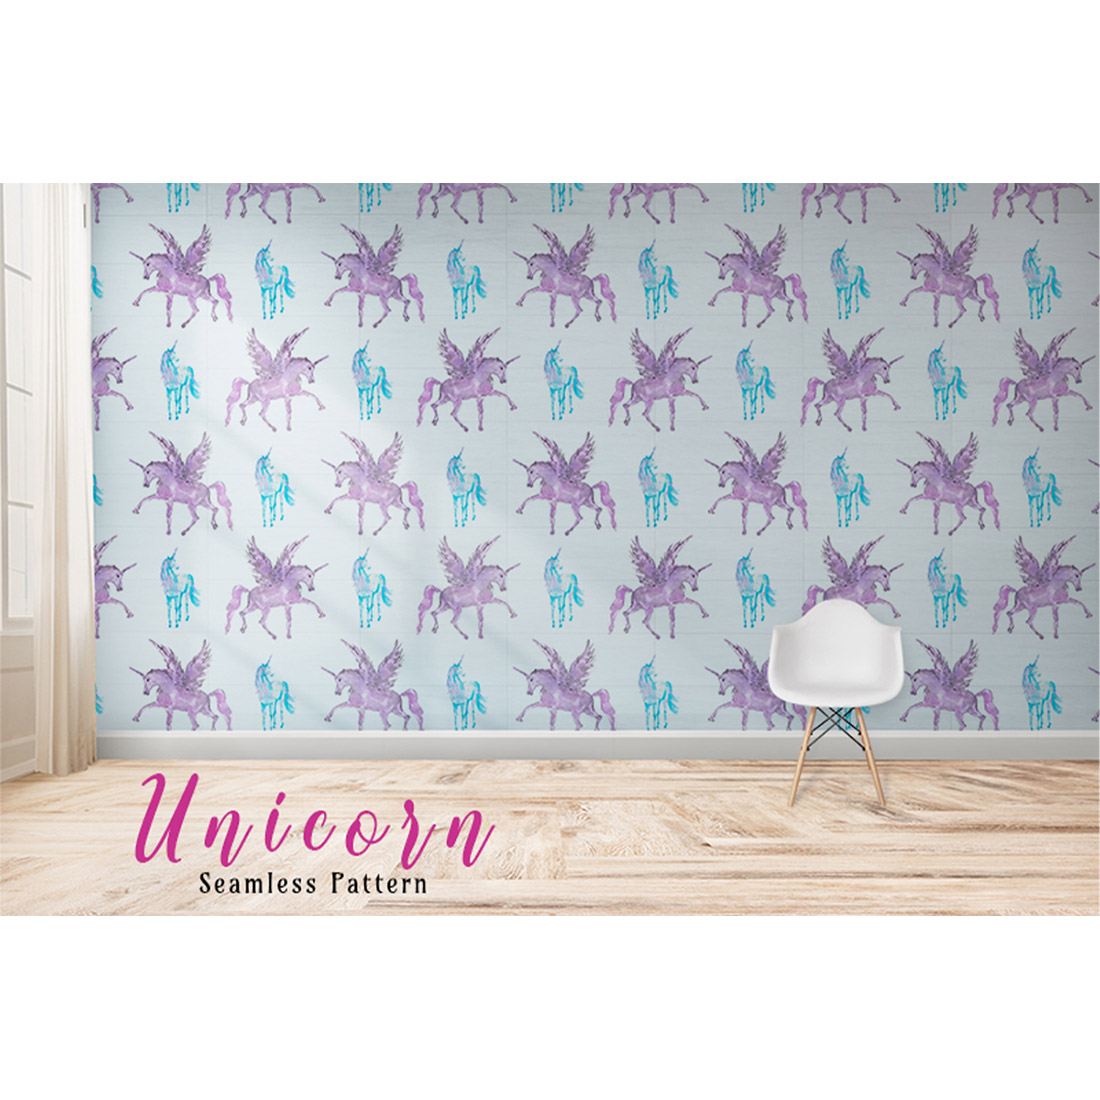 Image with enchanting patterns with unicorns